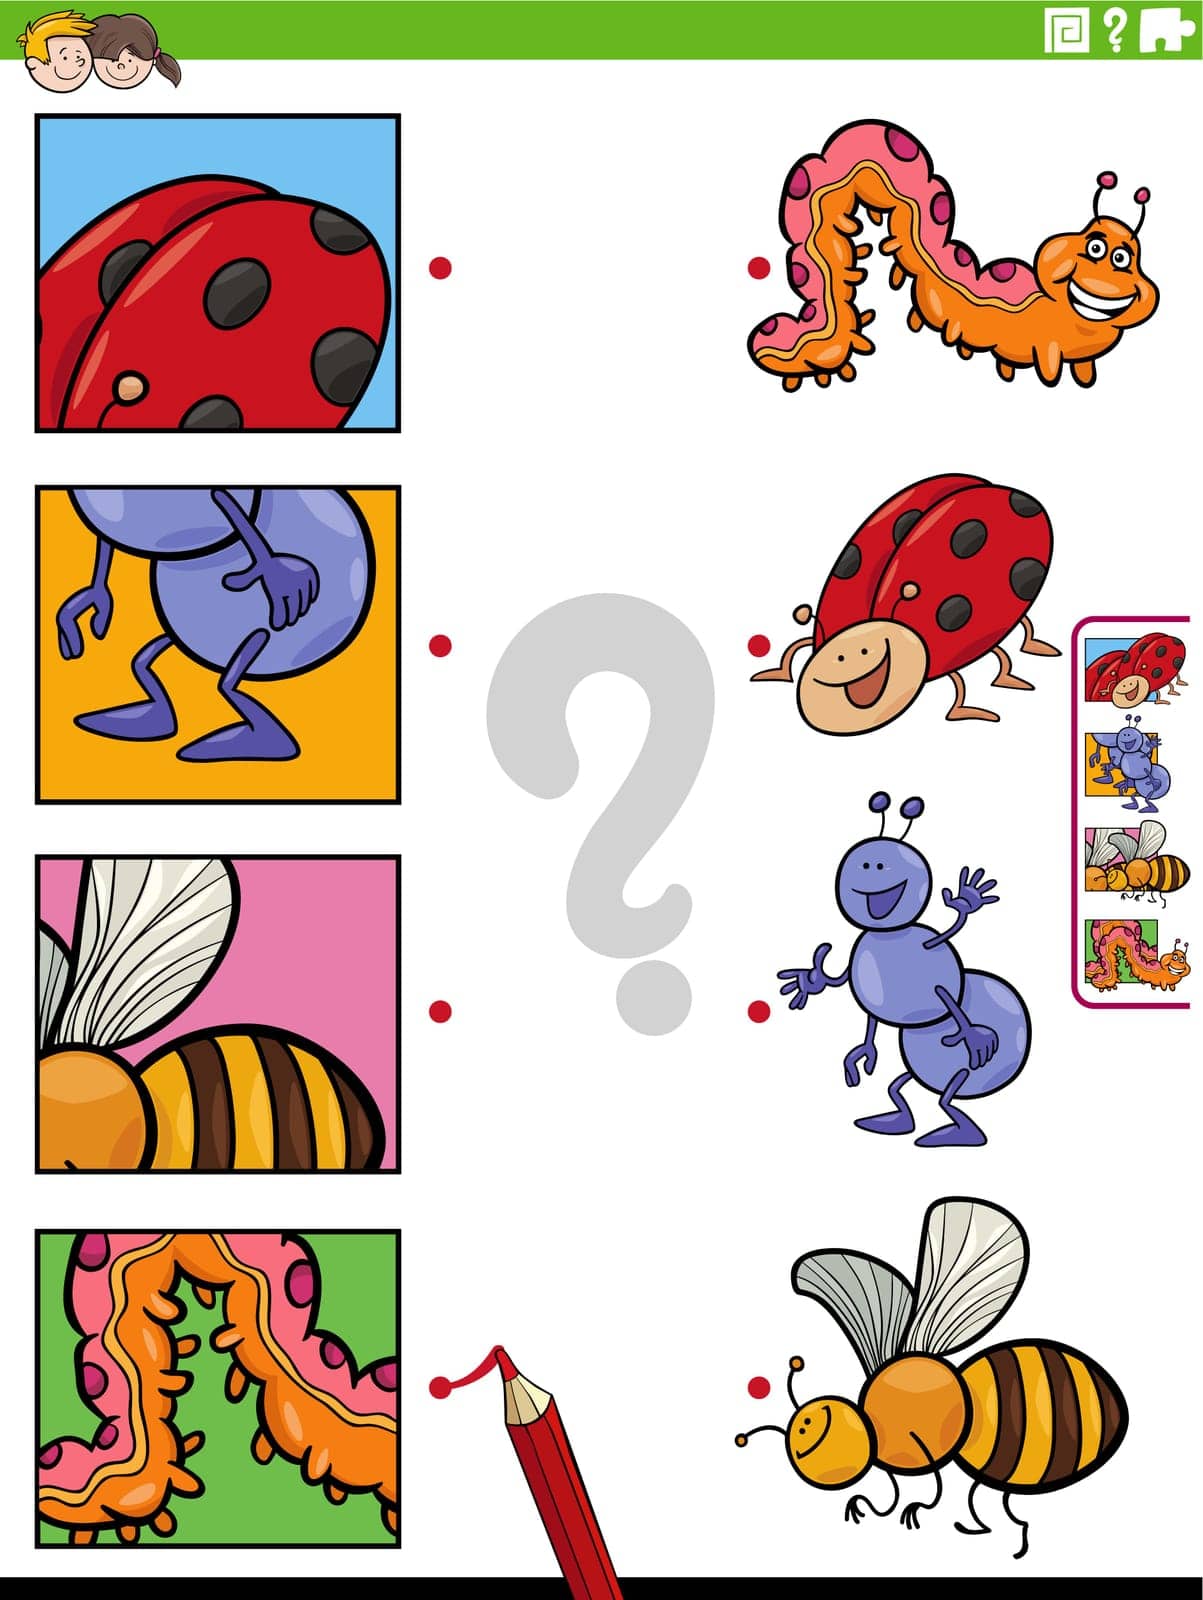 Cartoon illustration of educational matching game with insects animal characters and pictures clippings